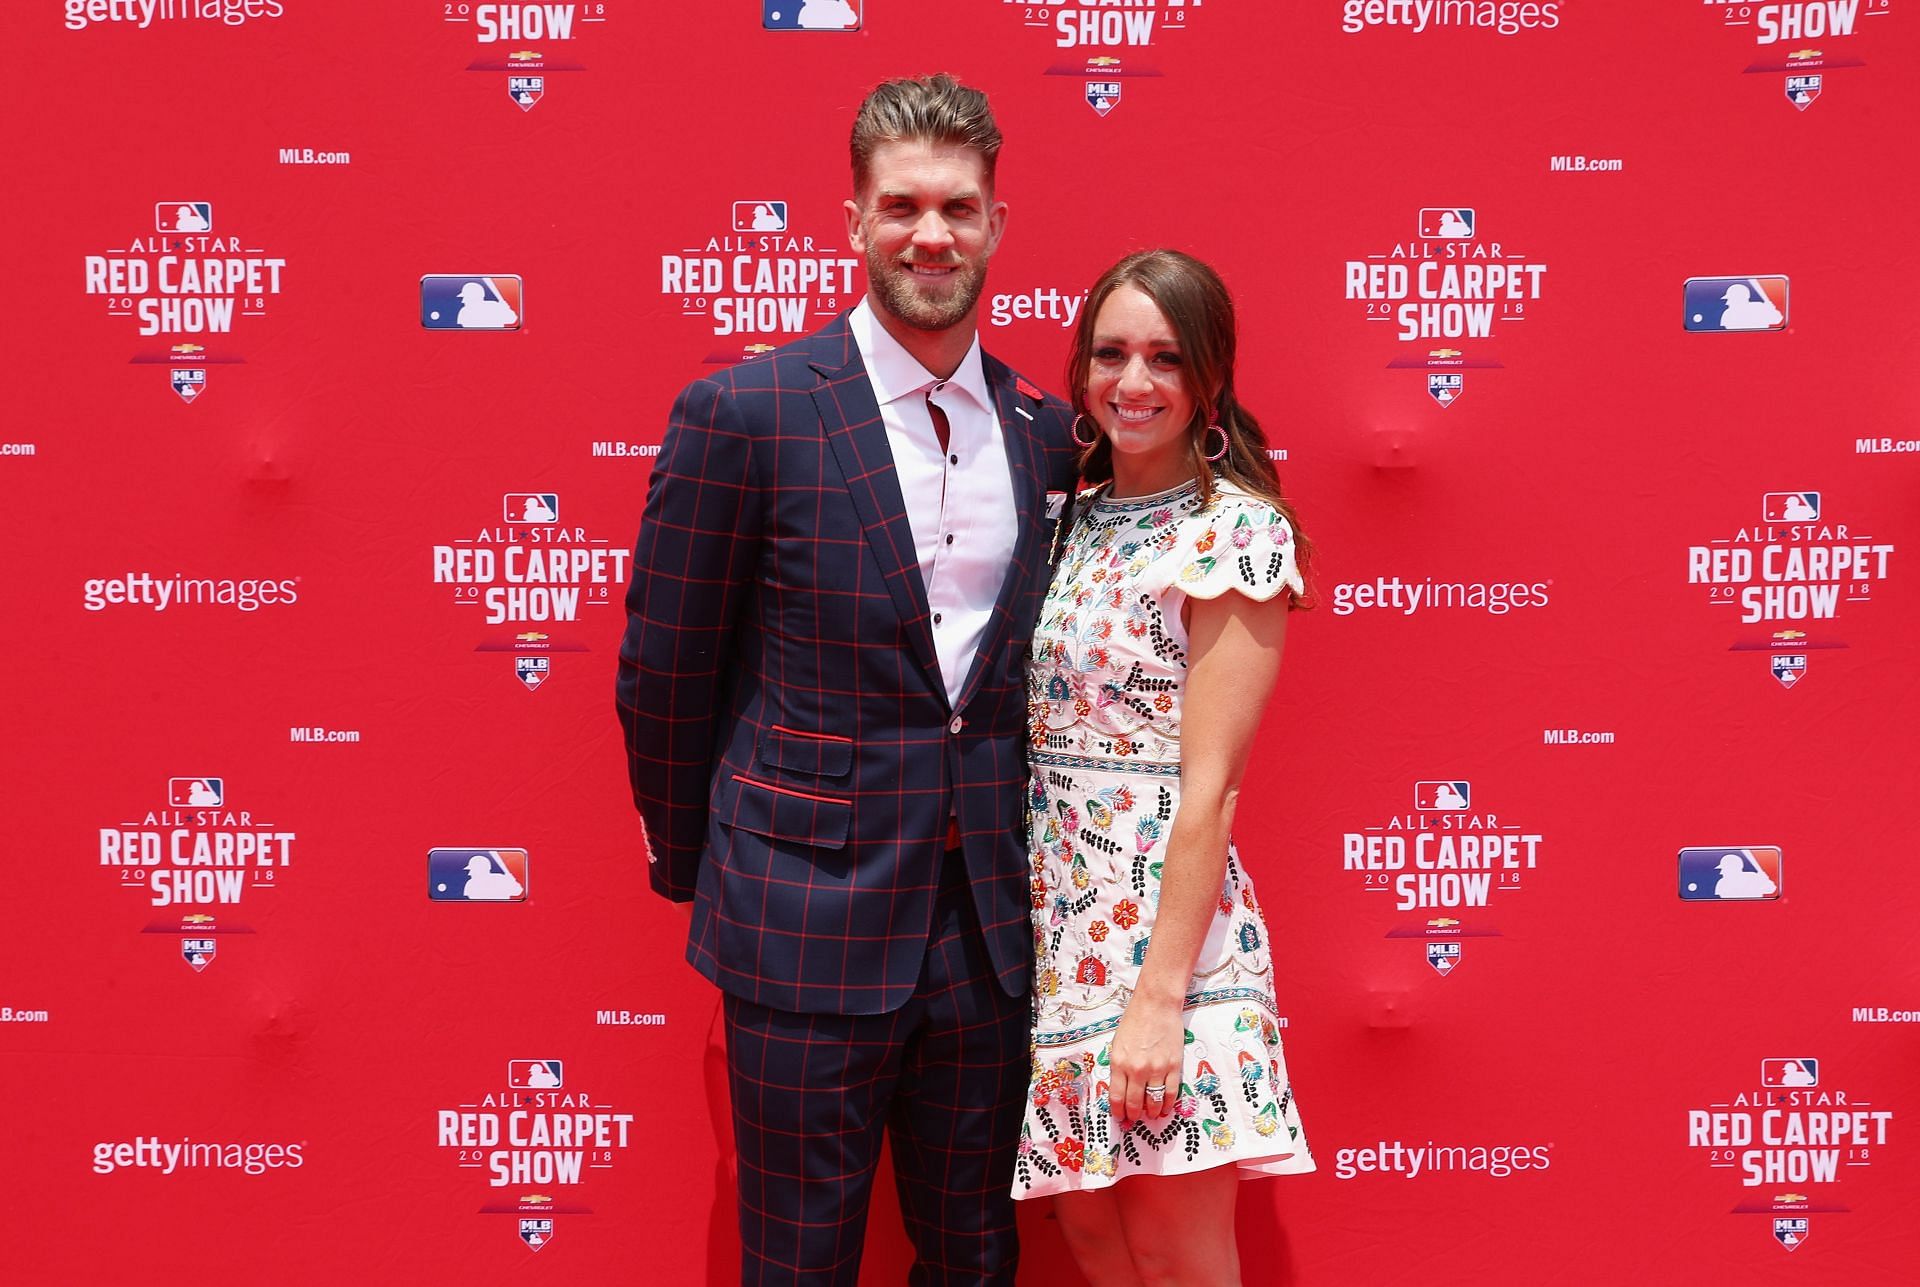 89th MLB All-Star Game, presented by MasterCard - Red Carpet.